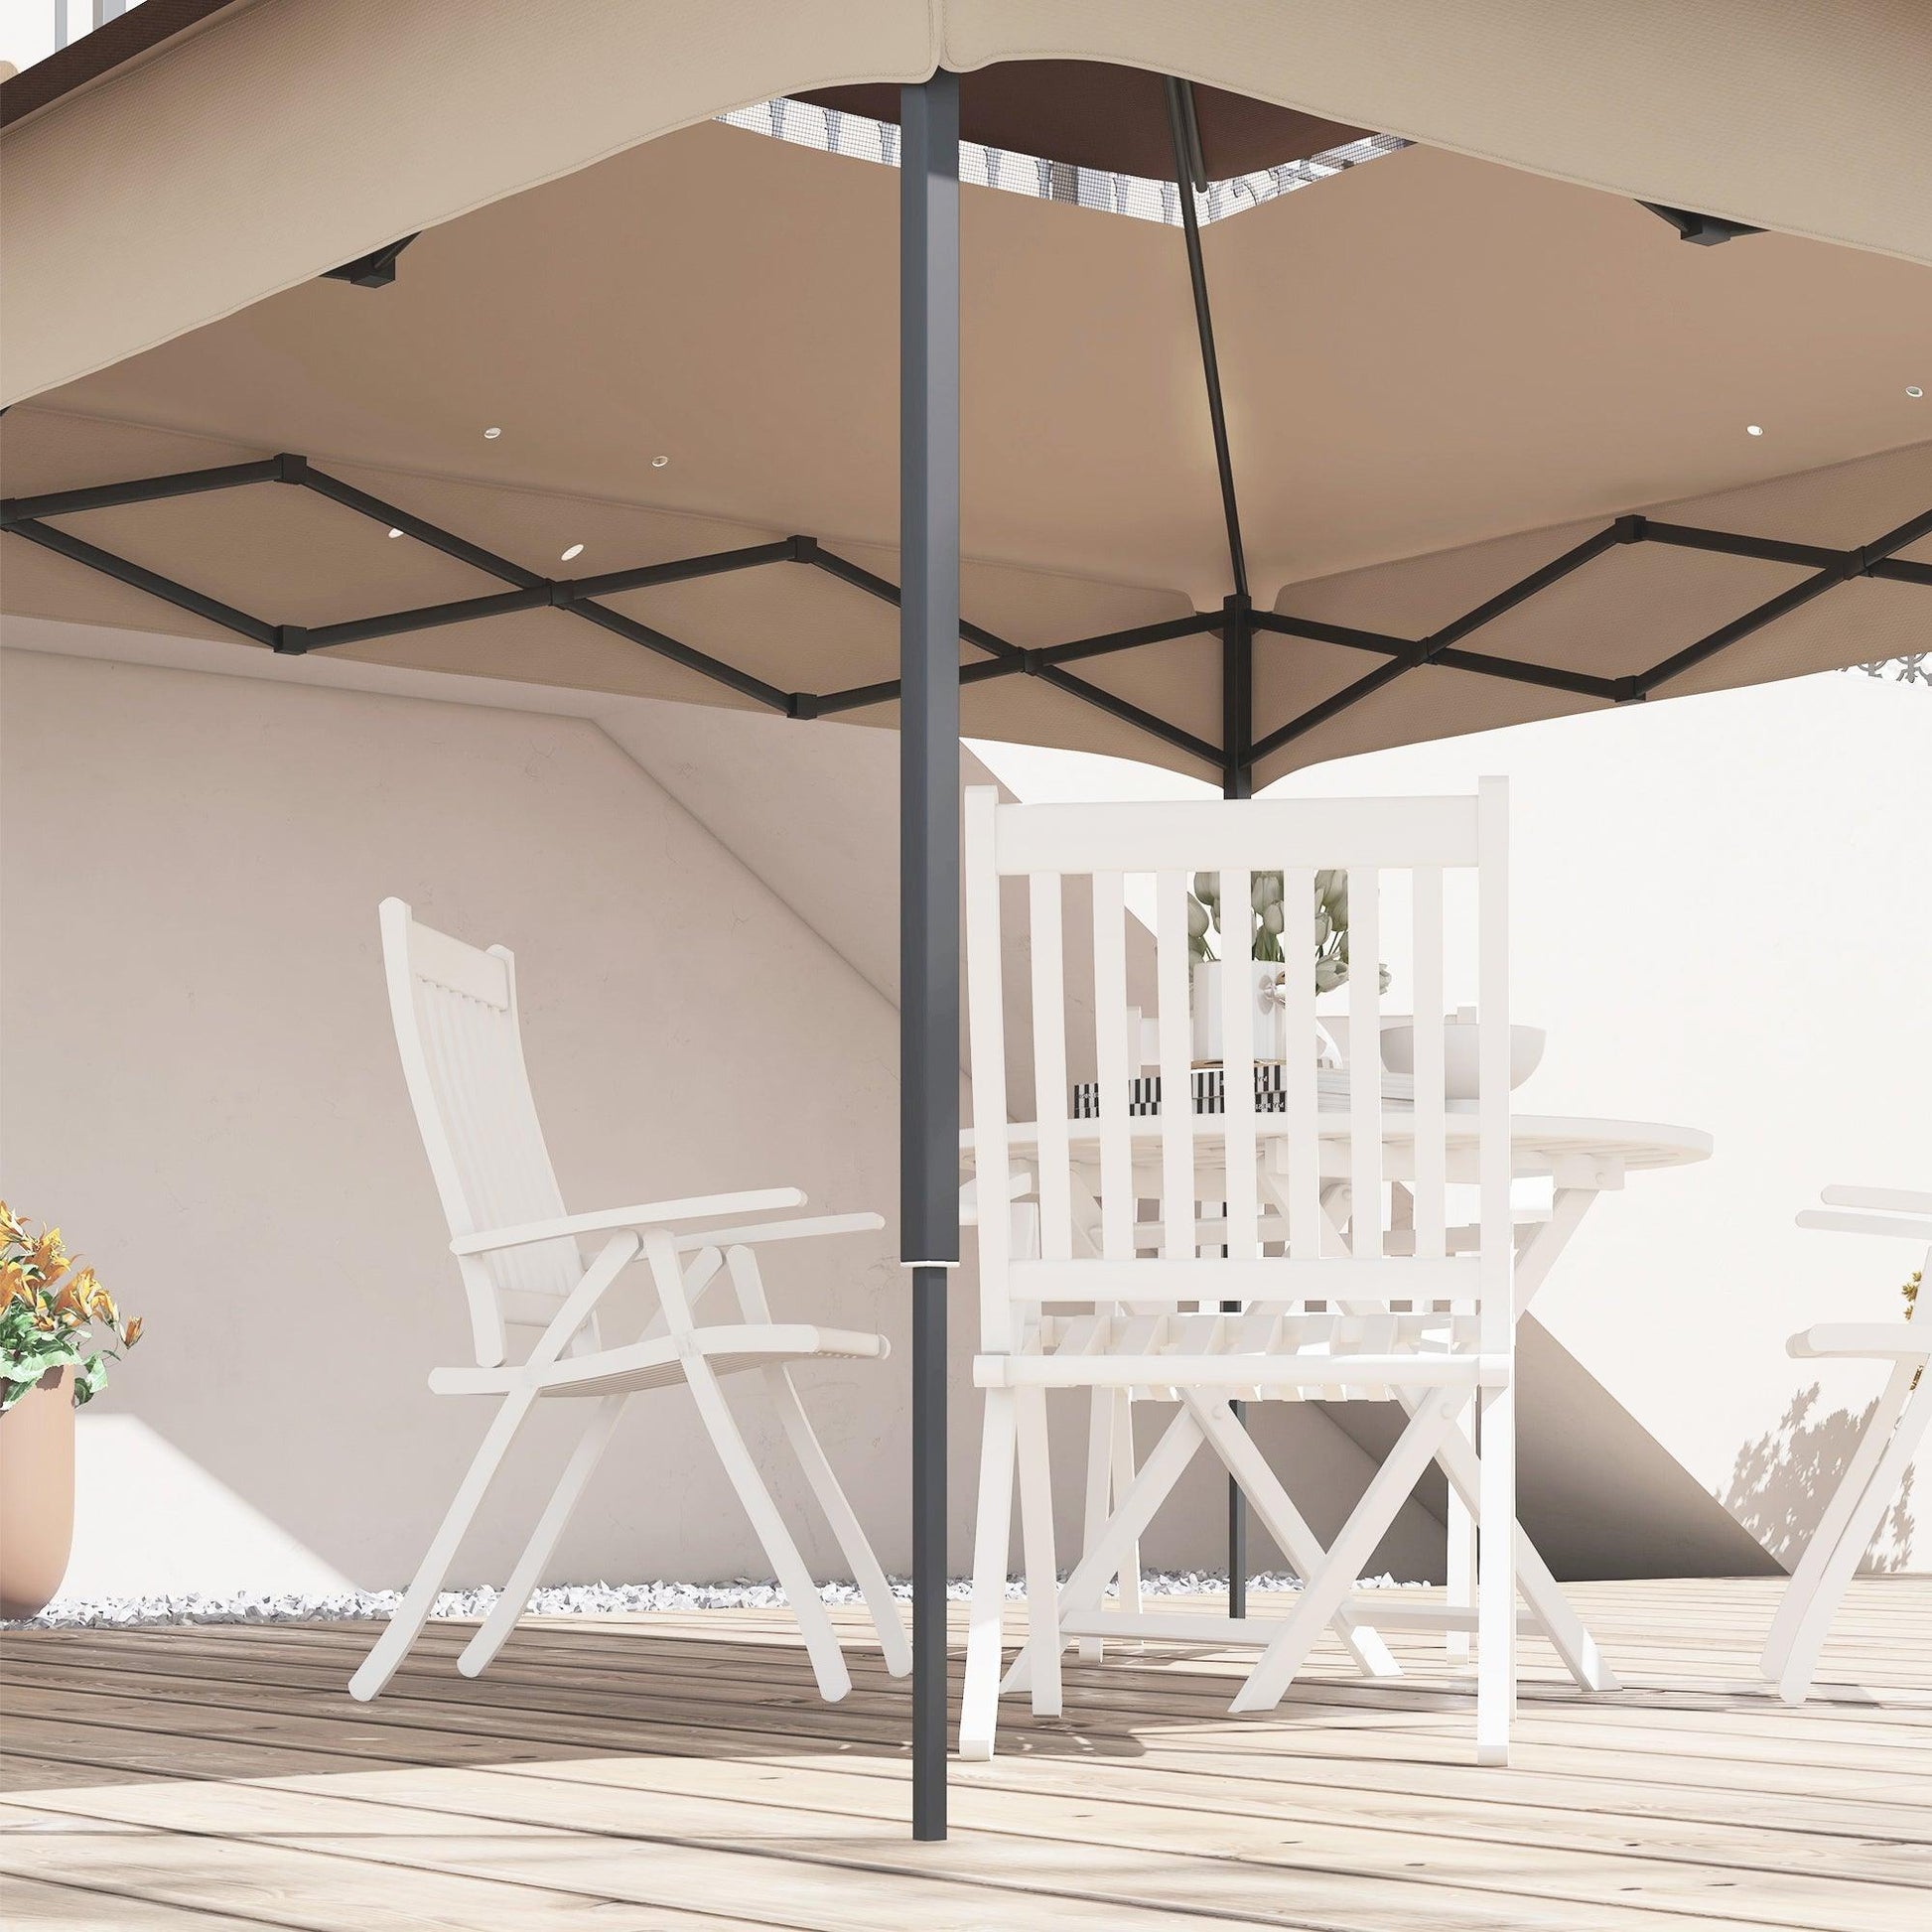 Outsunny Pop up Gazebo Cover, 2-Tier Gazebo Roof Replacement for 3.25m x 3.25m Frame, 30+ UV Protection, Beige - ALL4U RETAILER LTD